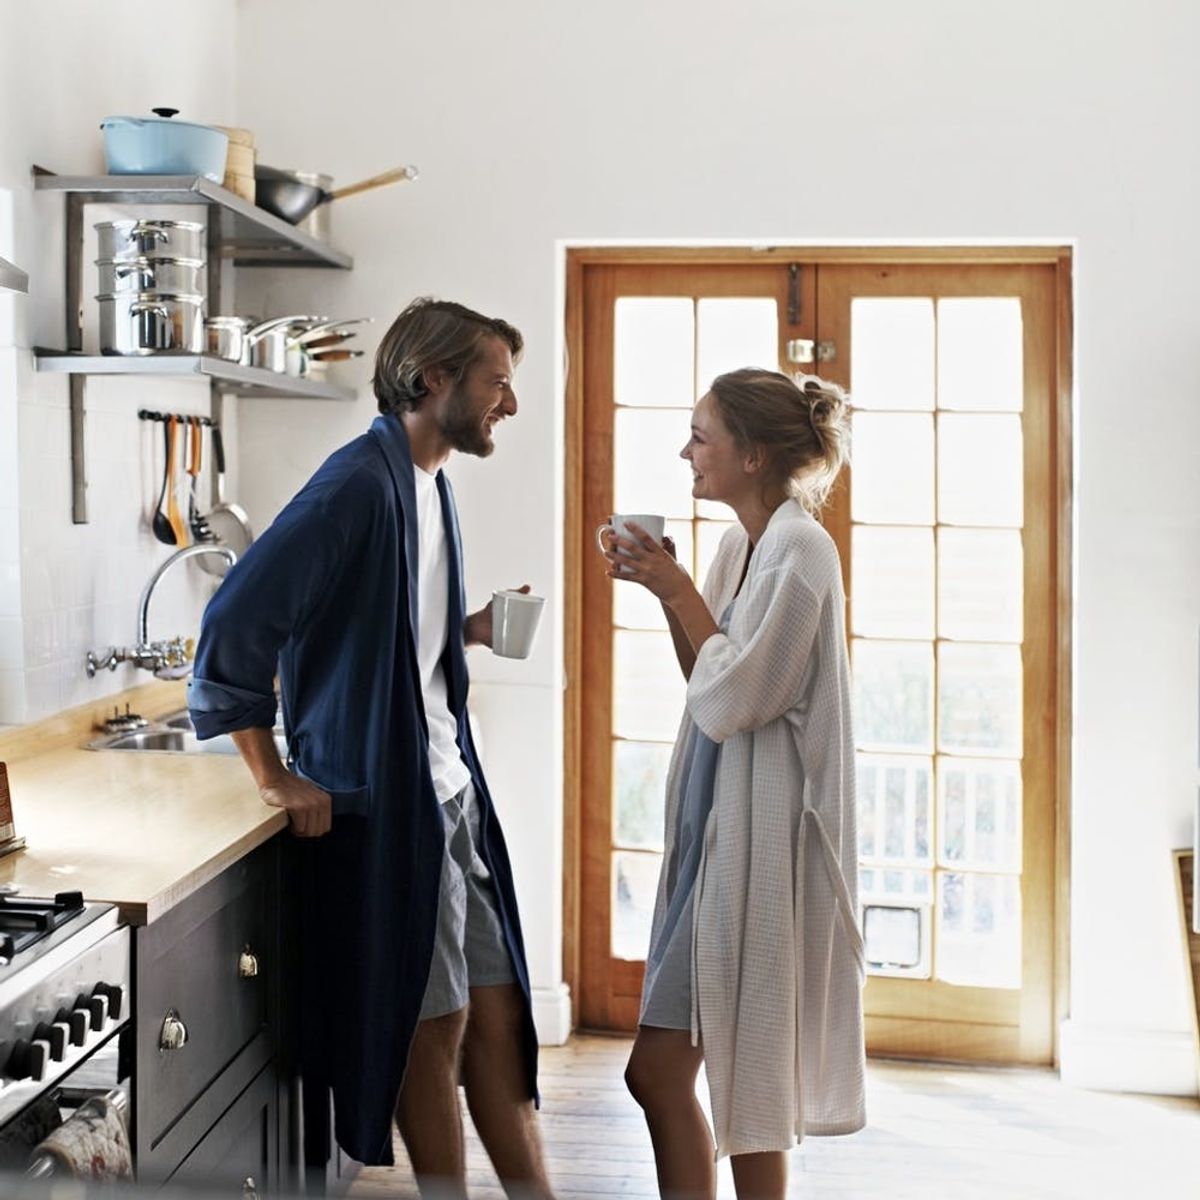 10 Signs You’re Basically Already Living Together